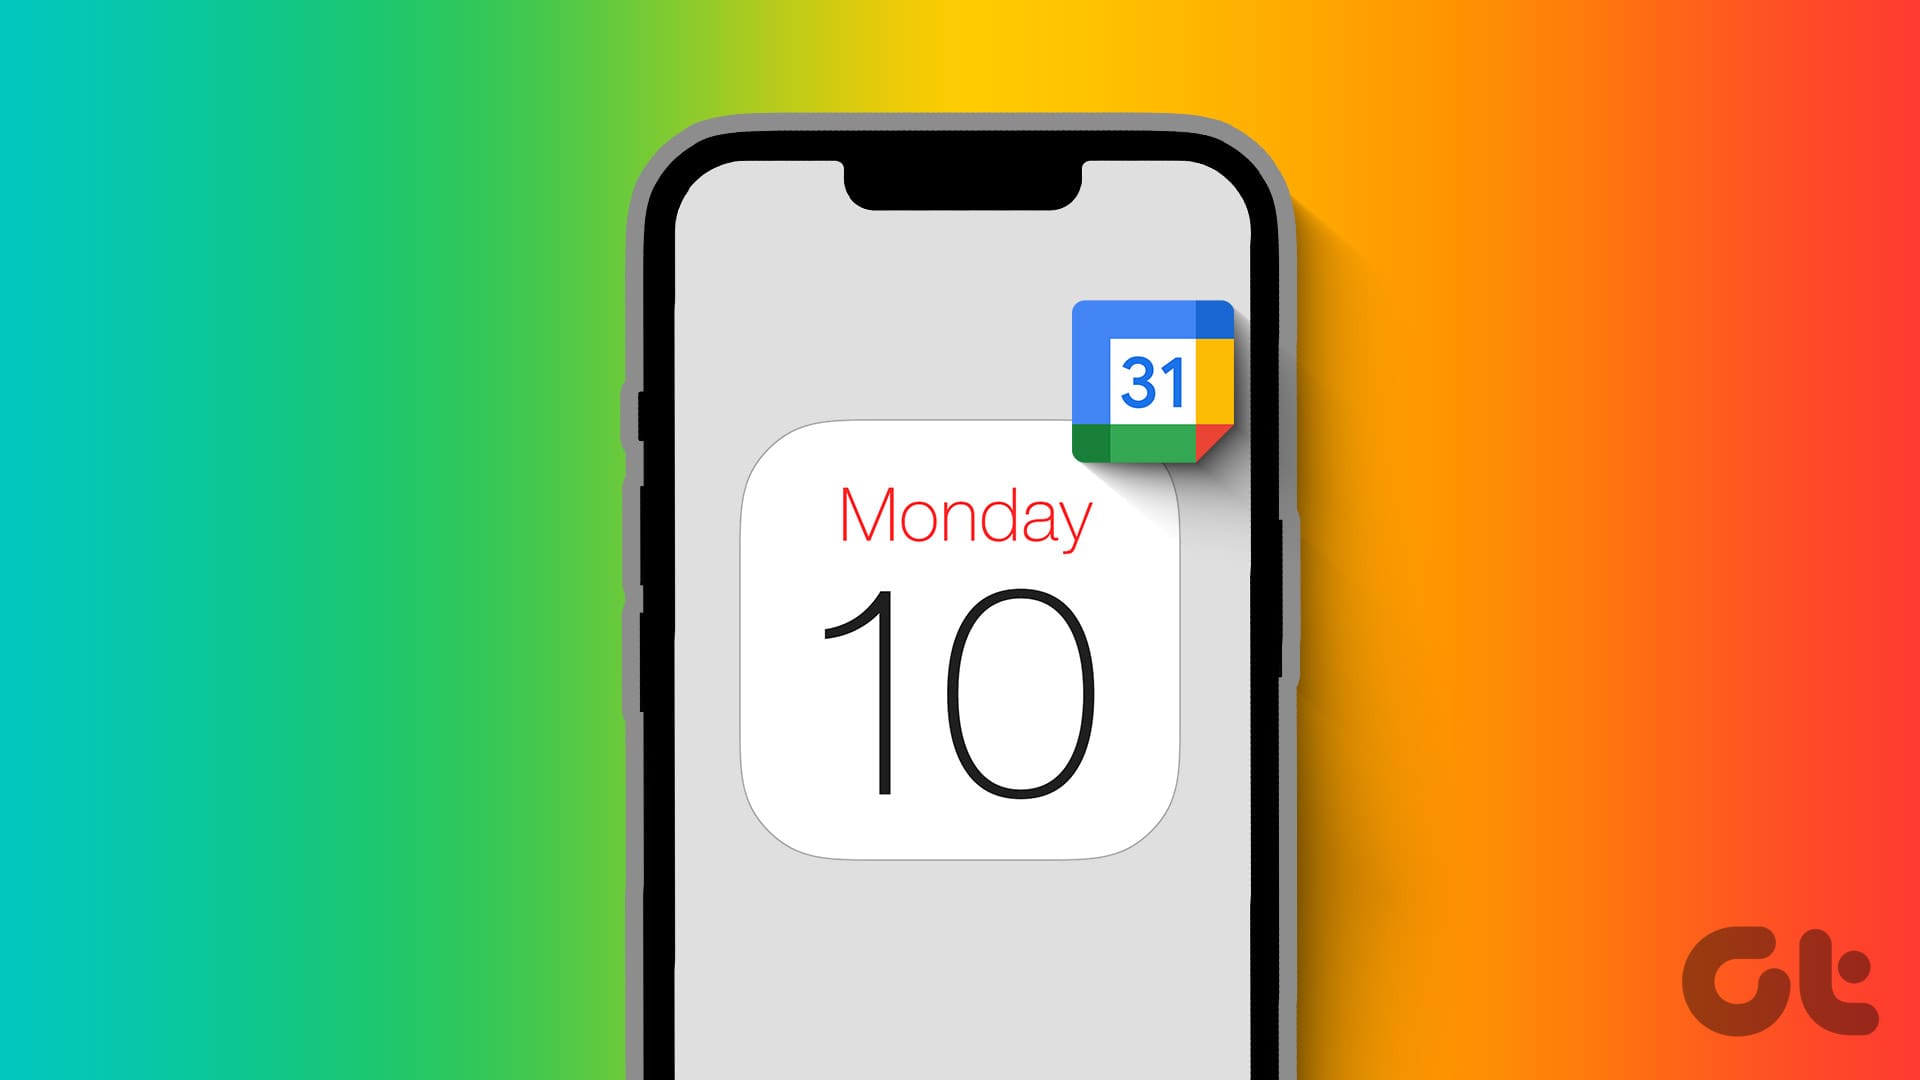 How to Use and Share Google Calendar on iPhone